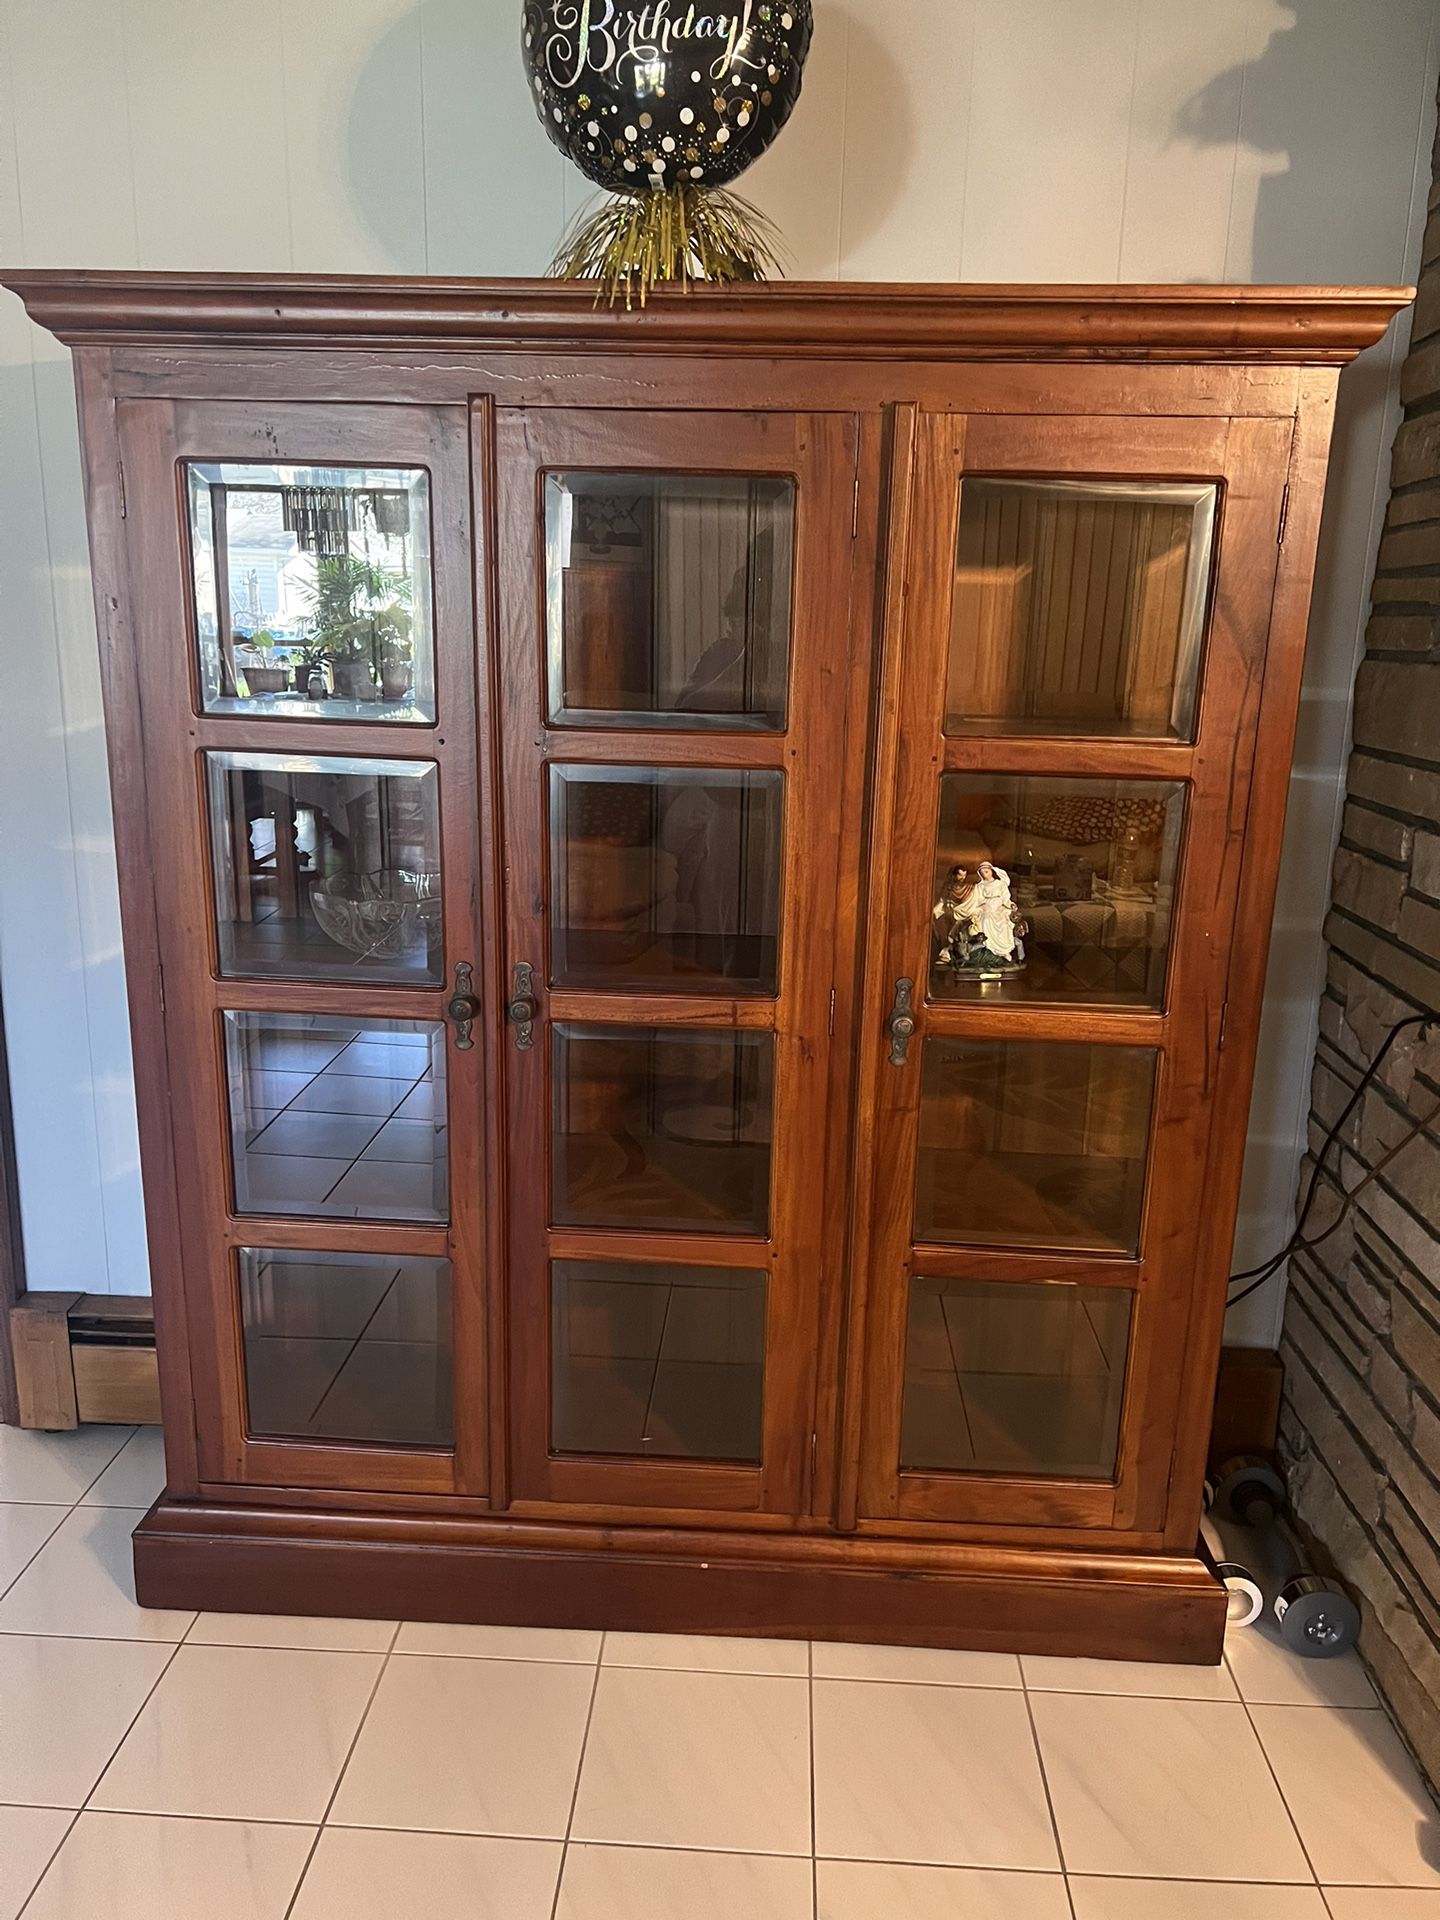 Two Century China Cabinet , Dimensions Are: Height 71, Width 59 And Length 15.